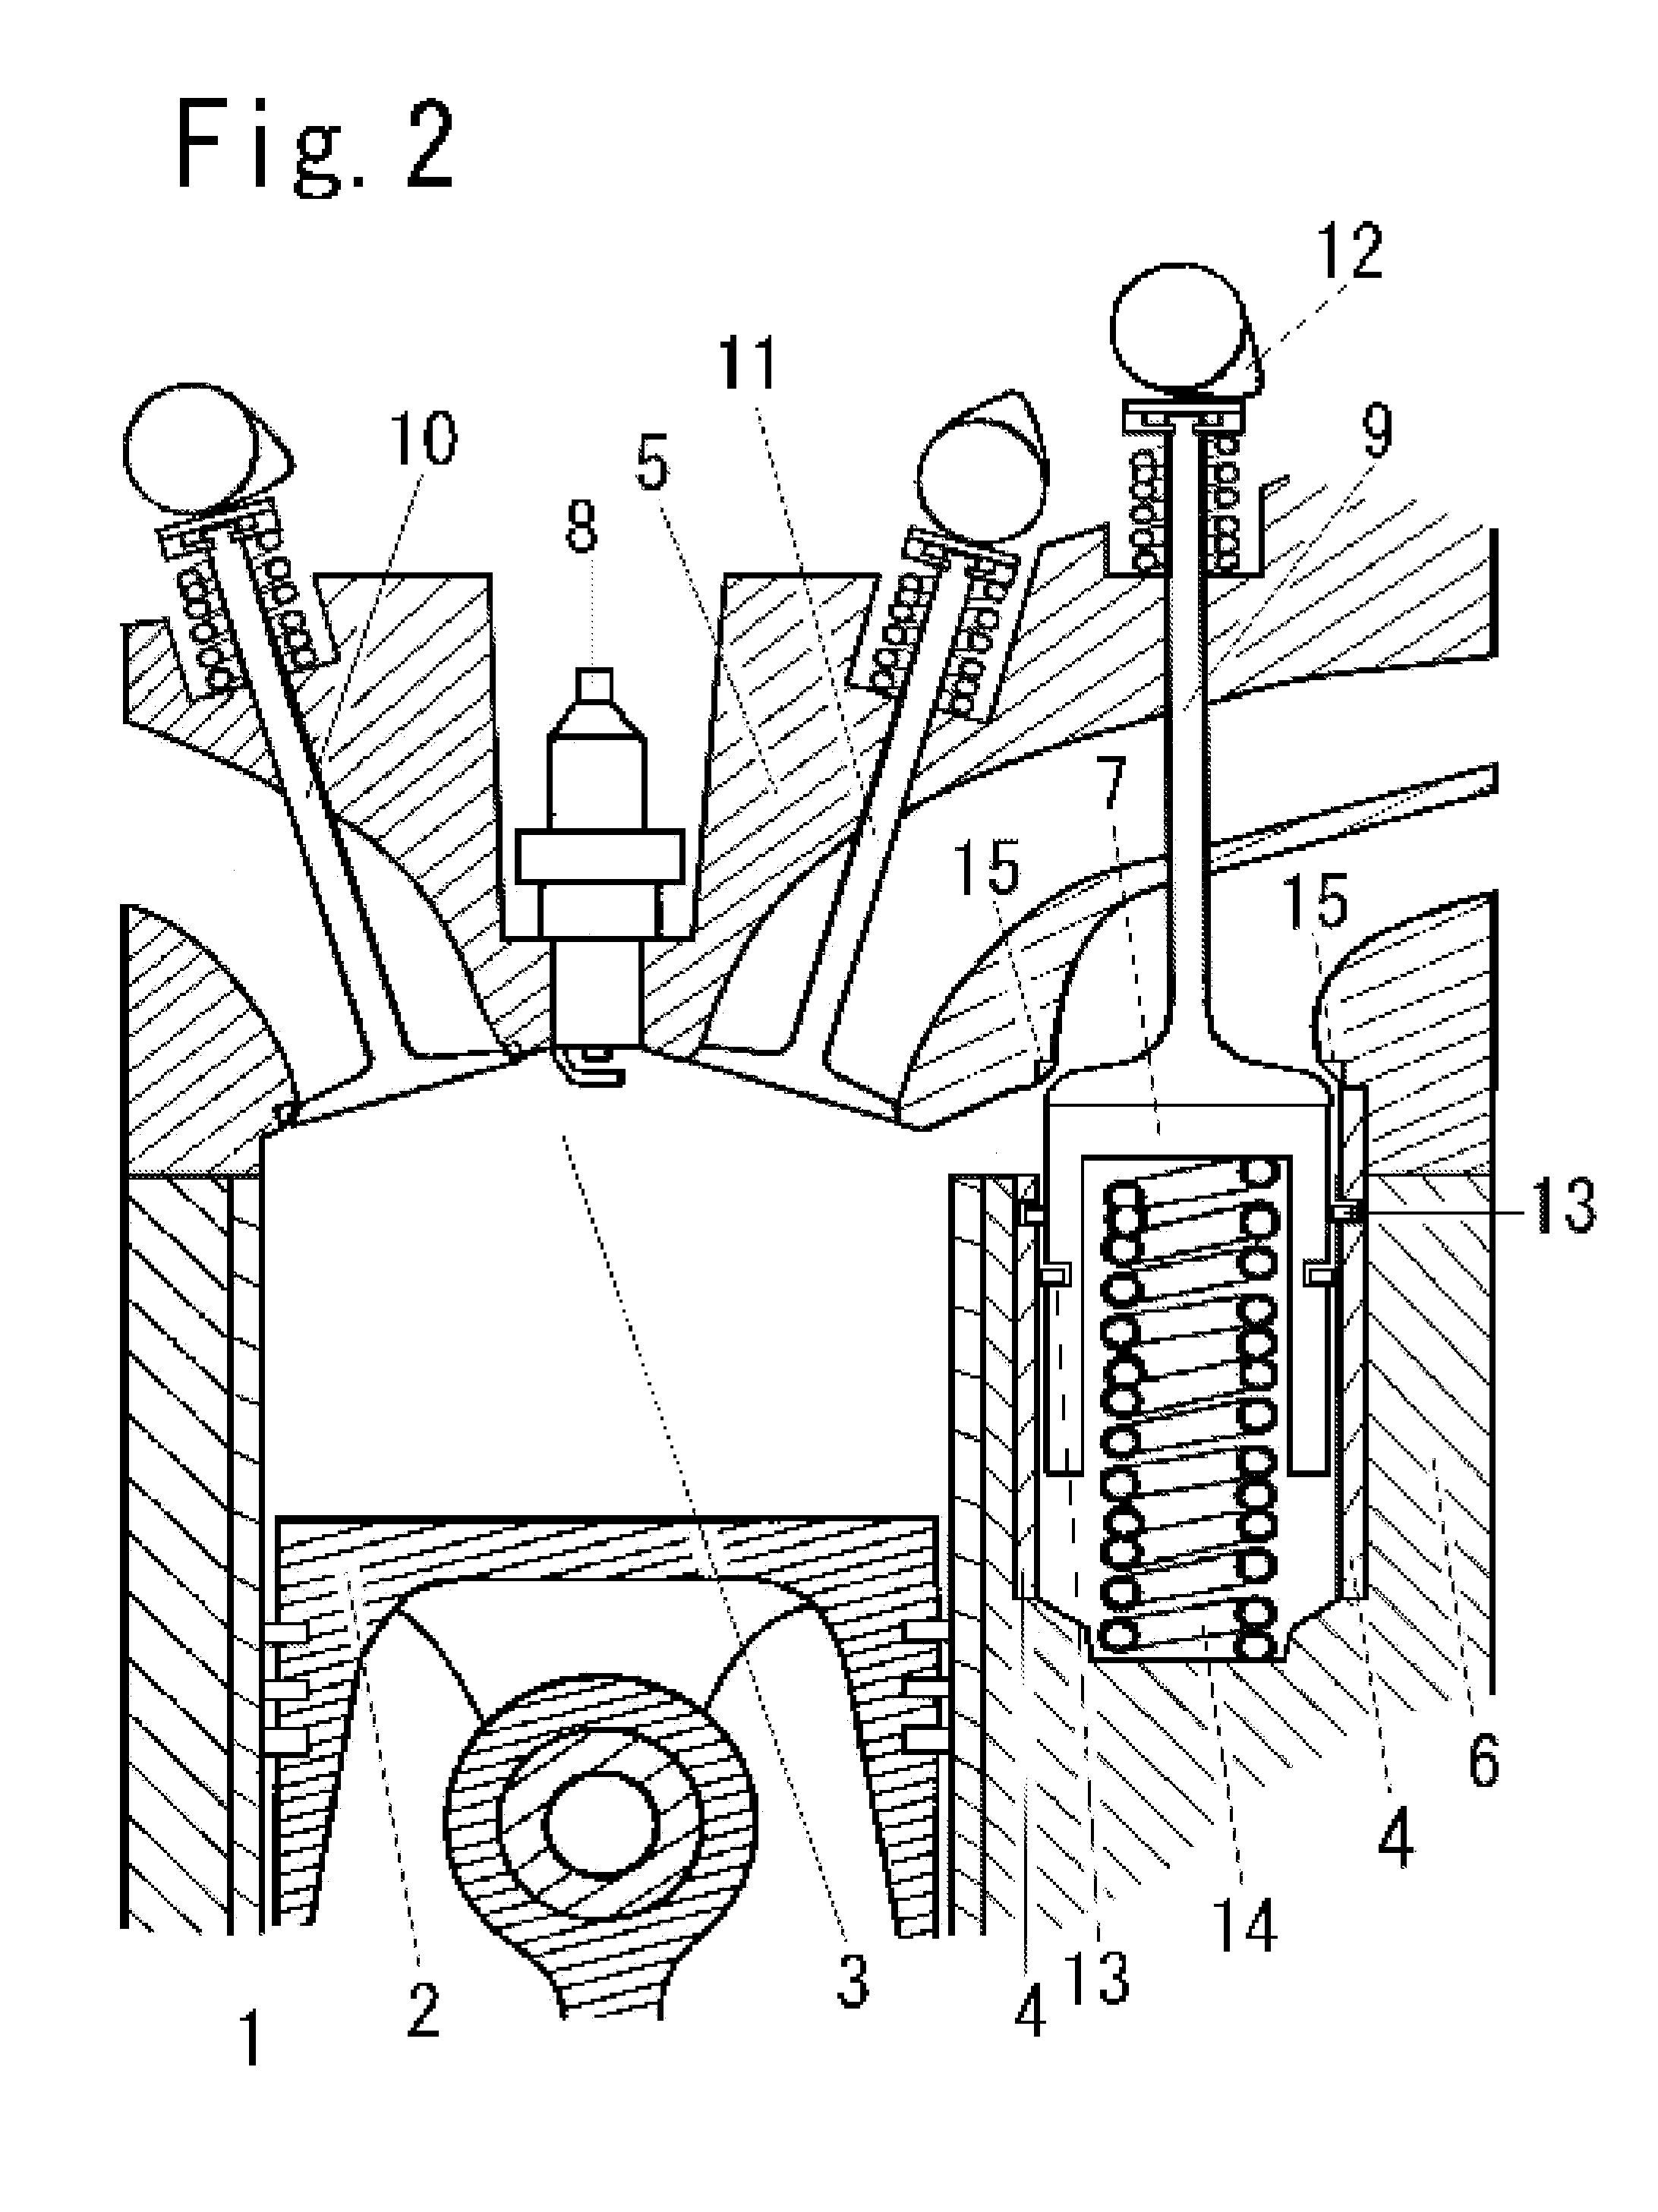 Spark ignition four-stroke cycle engine